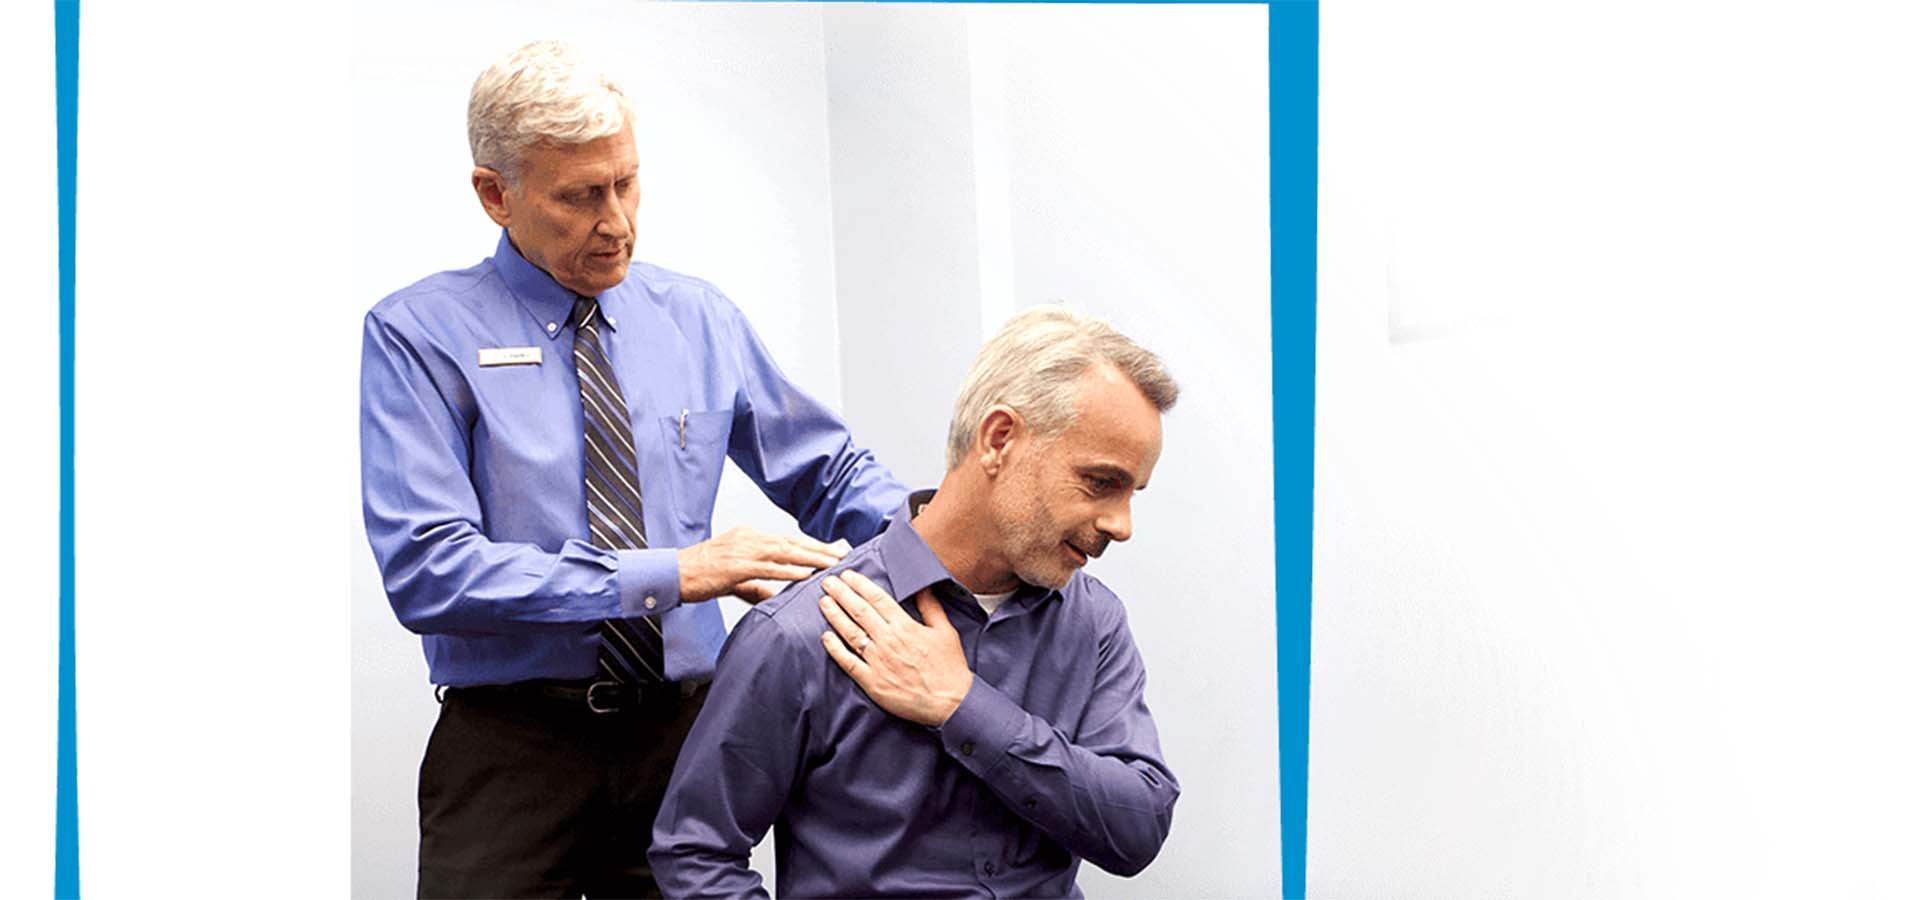 A chiropractic doctor adjusting a man's back